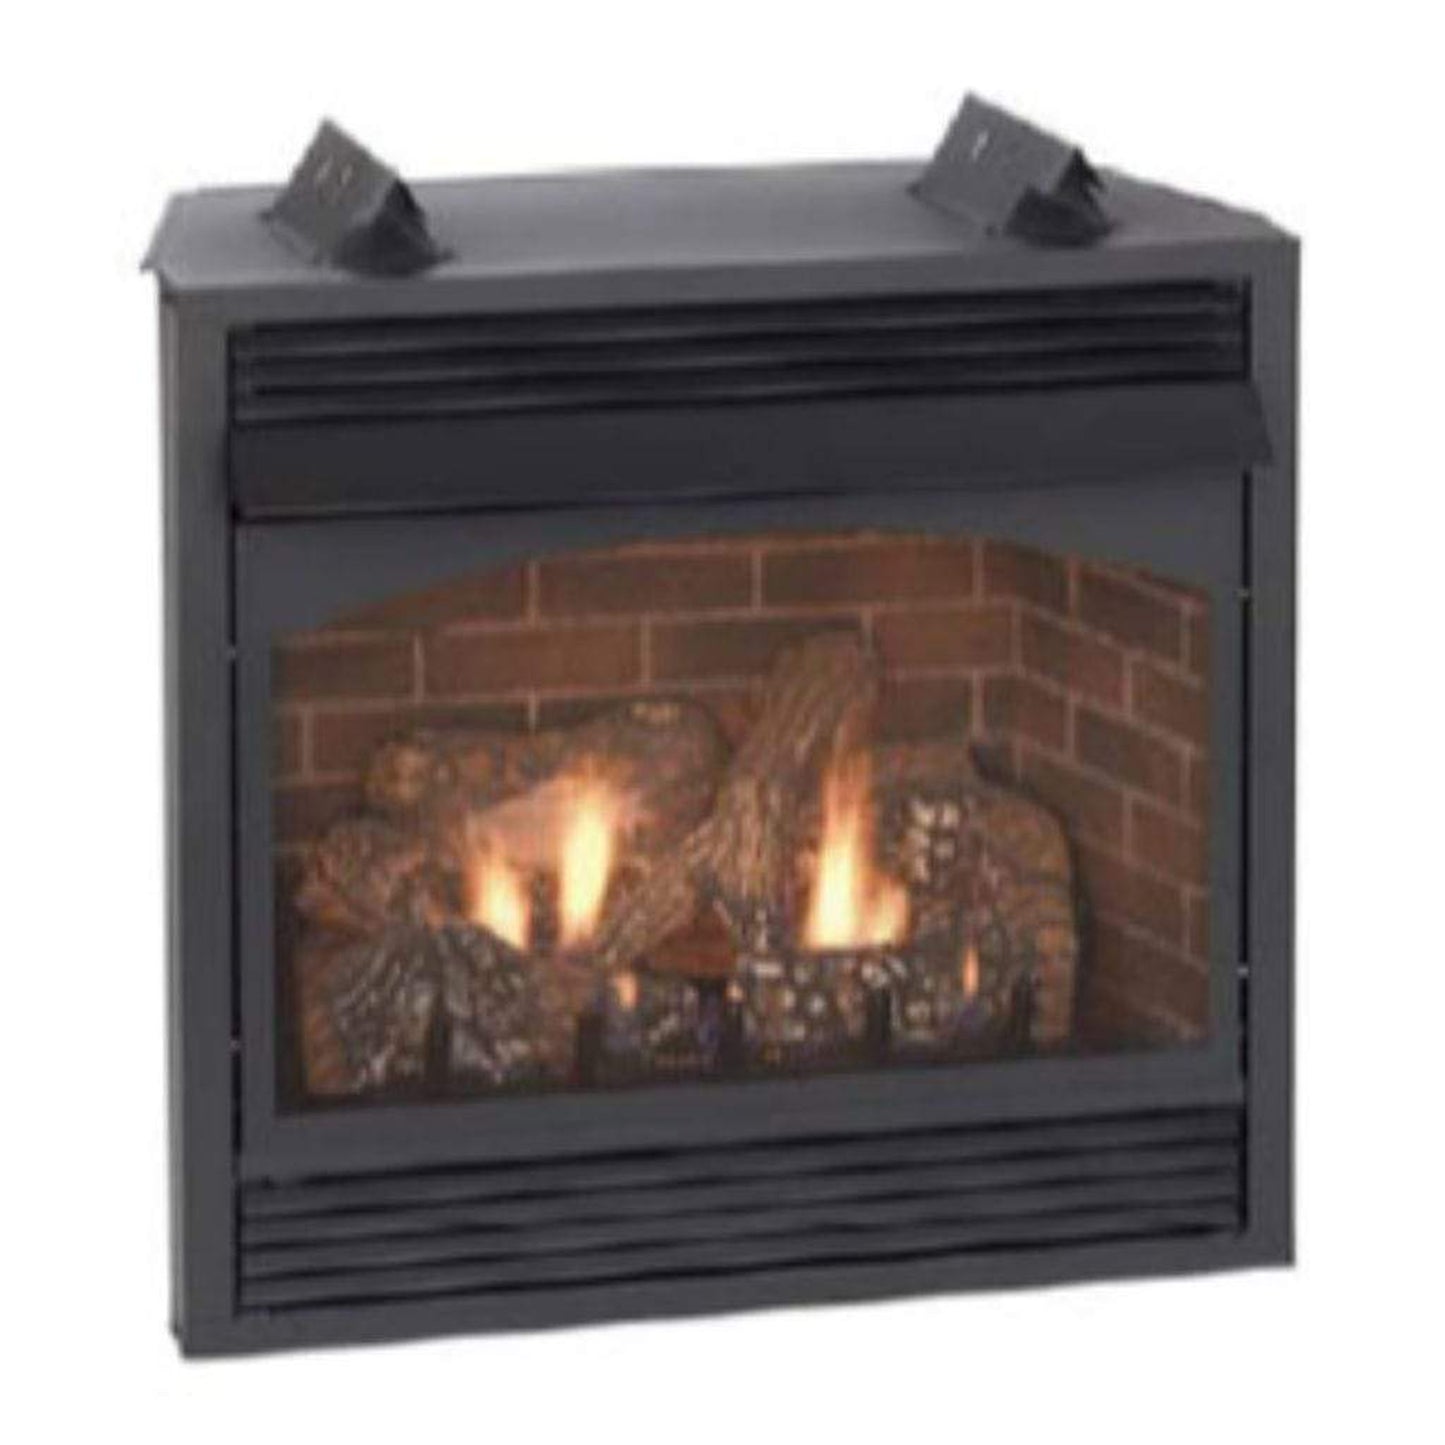 Empire 36 inch Vail Vent-Free Fireplace - VFPA36BP